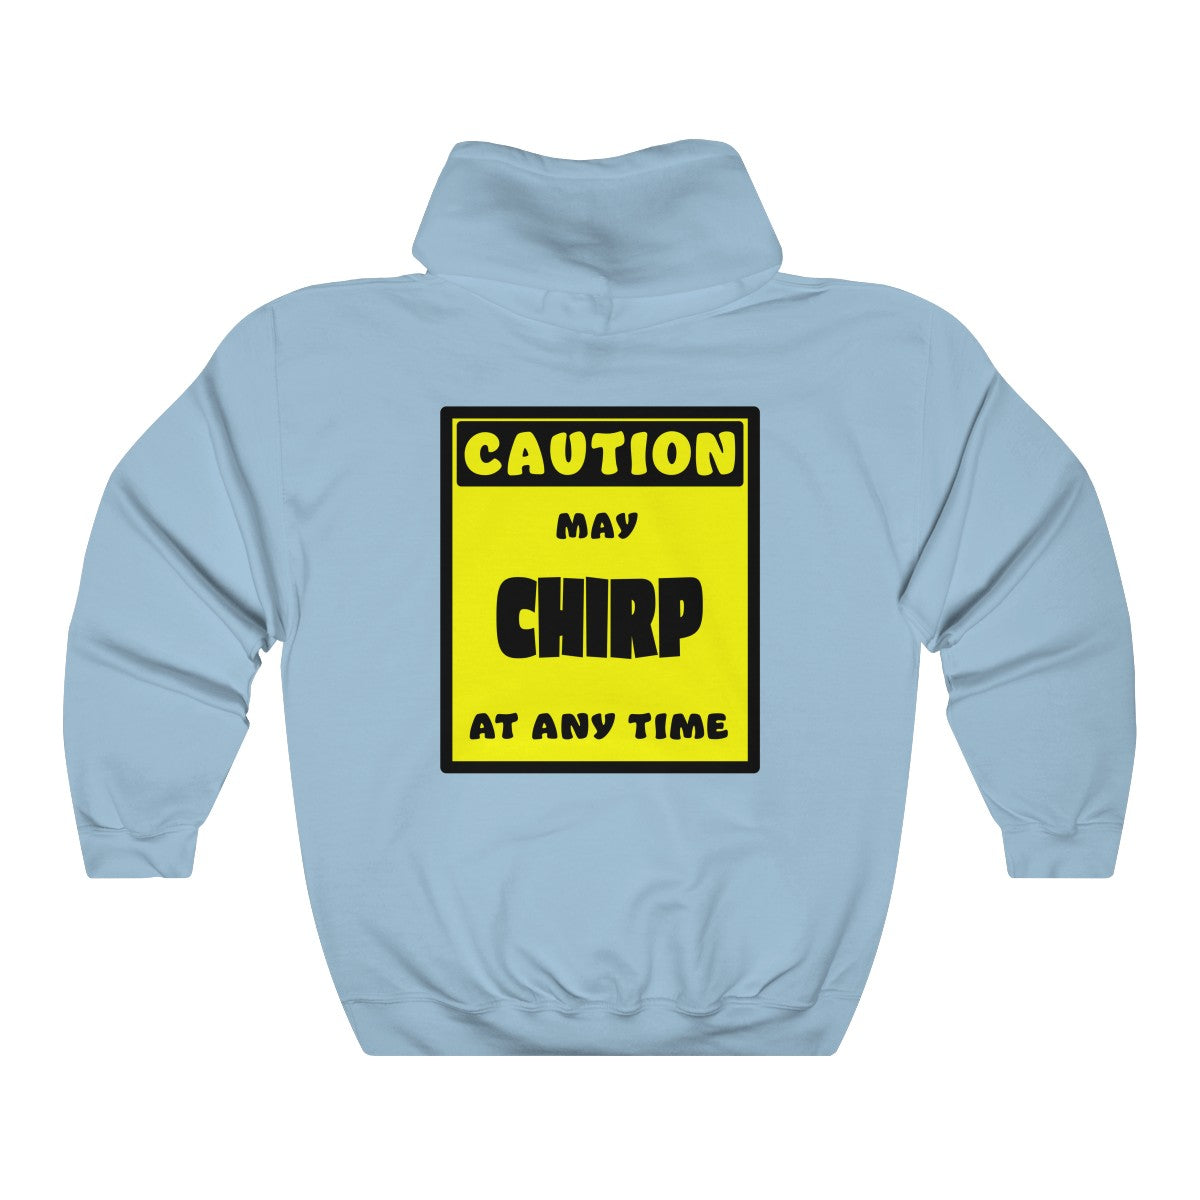 CAUTION! May CHIRP at any time! - Hoodie Hoodie AFLT-Whootorca Light Blue S 